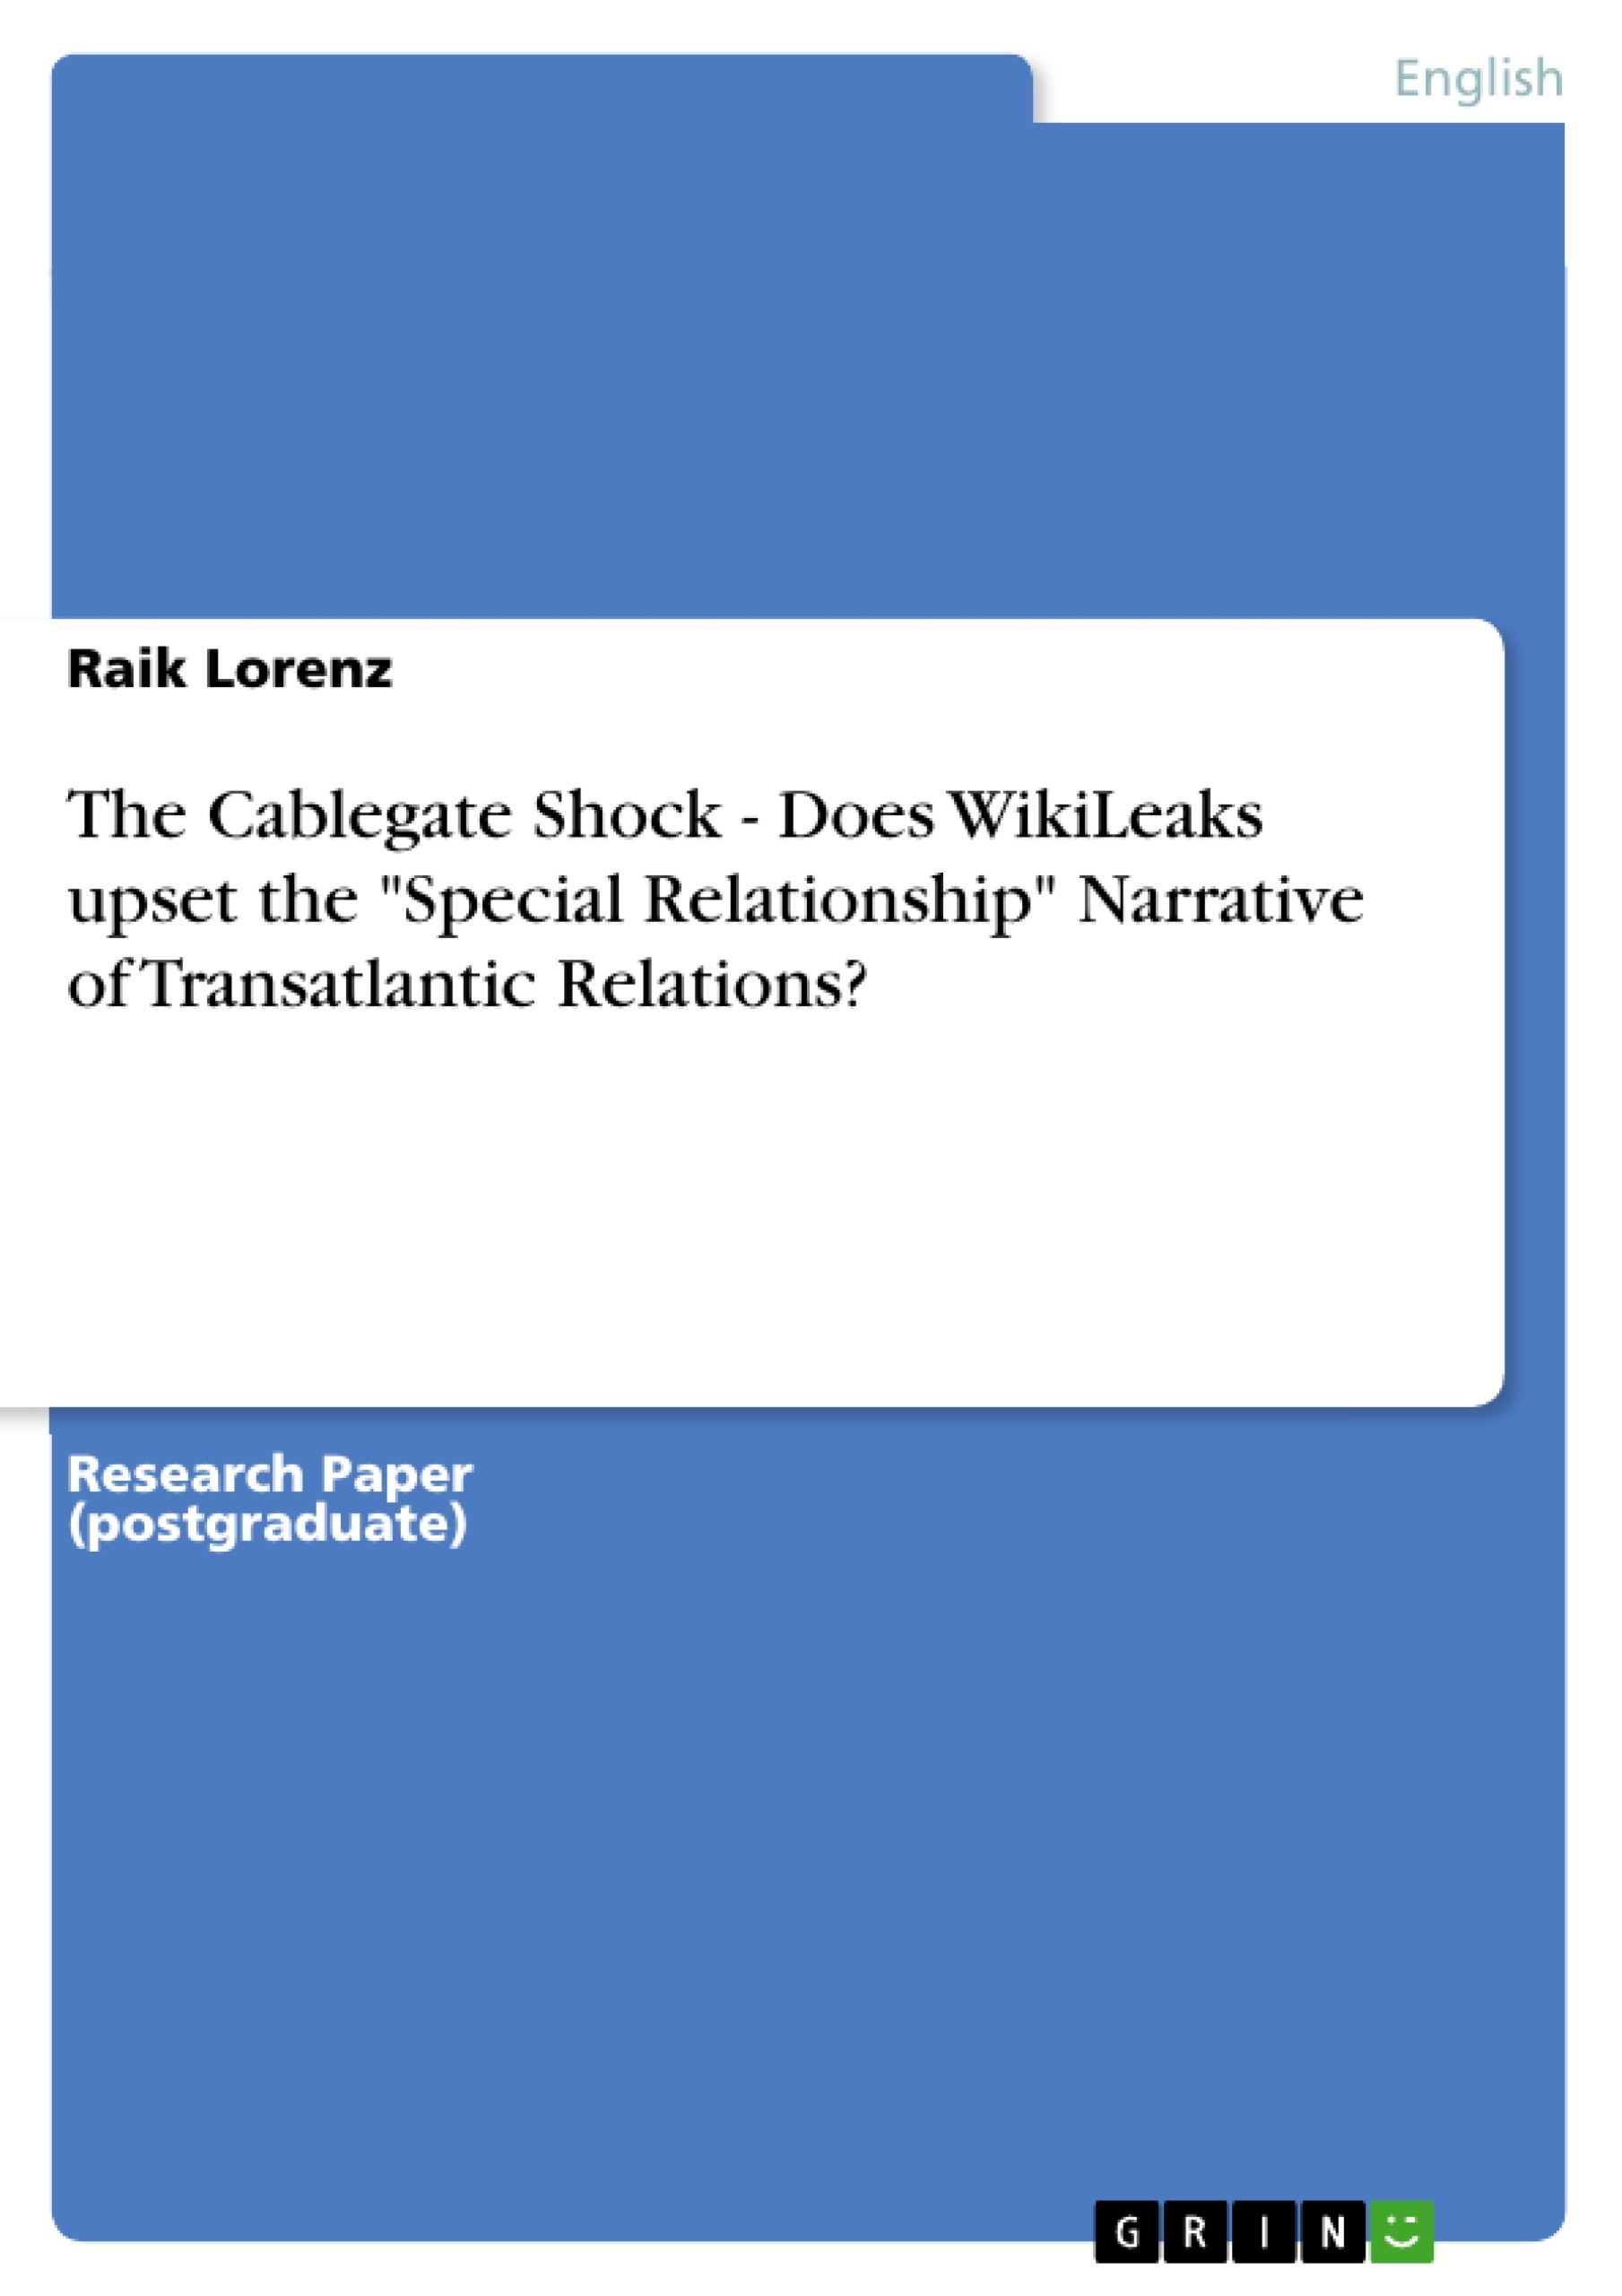 Titre: The Cablegate Shock - Does WikiLeaks upset the "Special Relationship" Narrative of Transatlantic Relations?